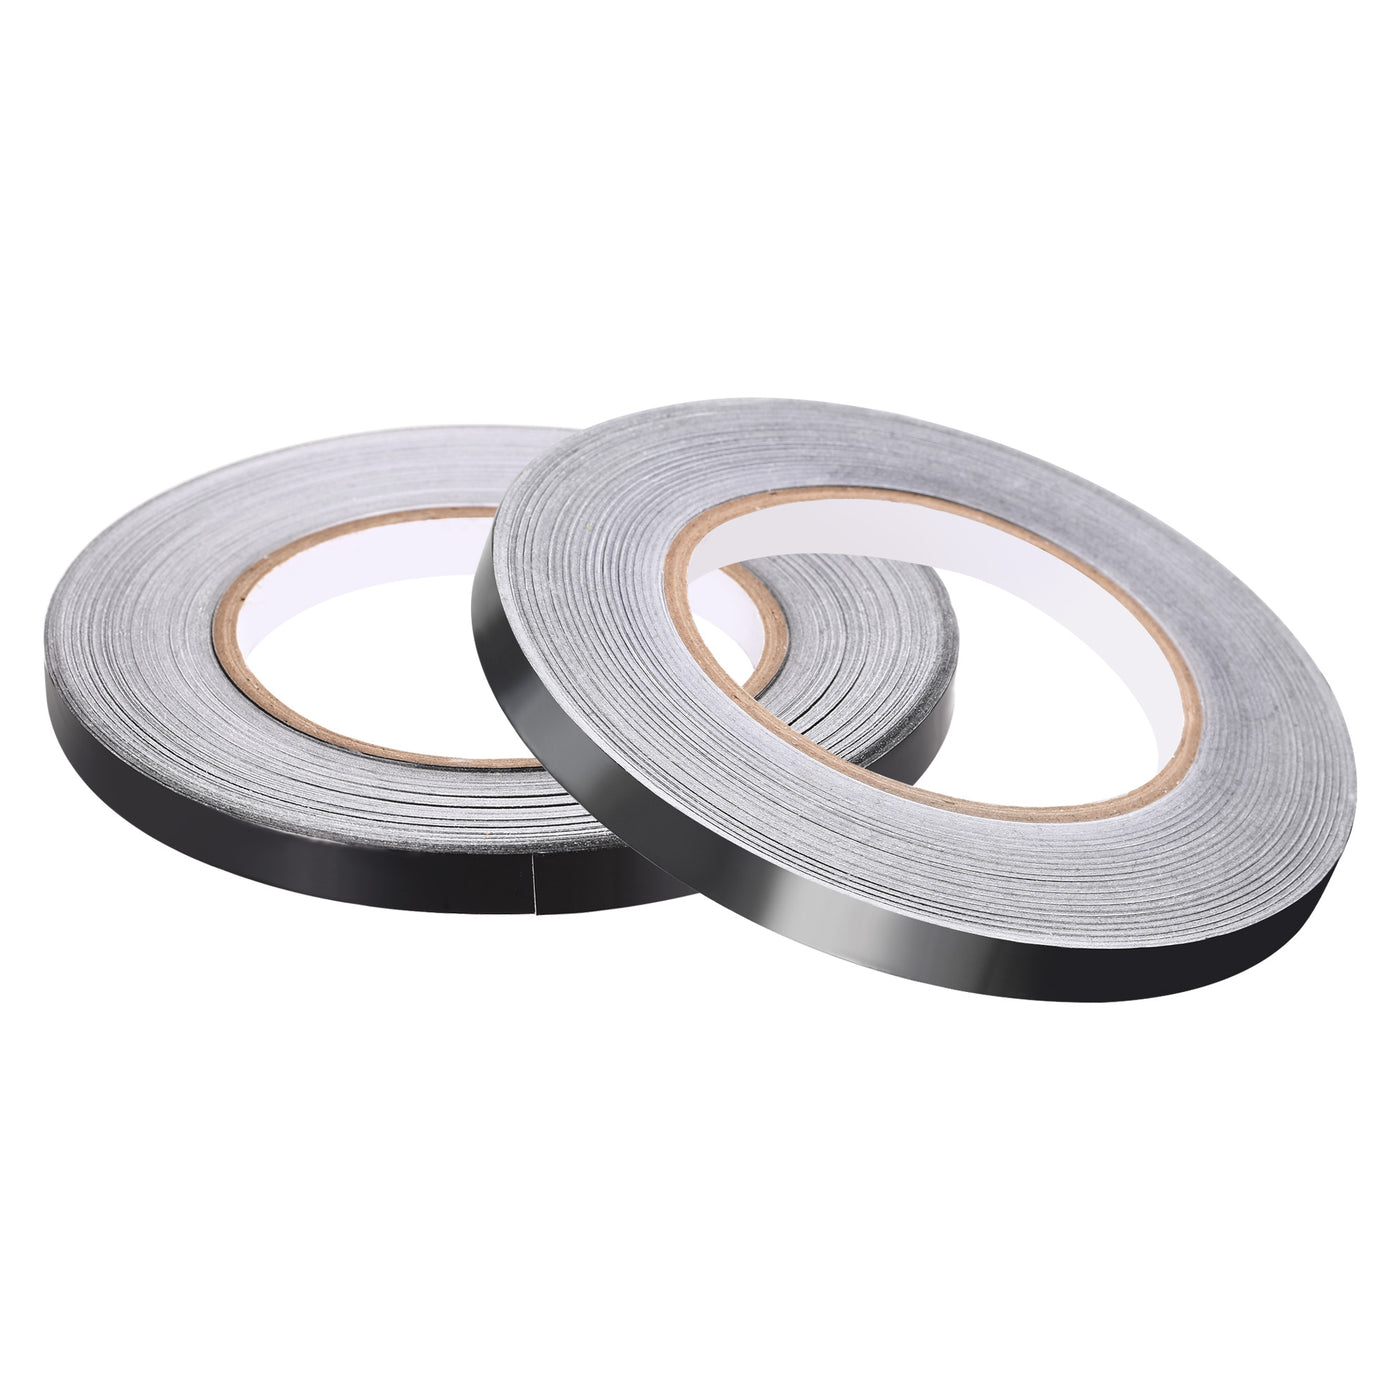 uxcell Uxcell 10mm Aluminum Foil Tape for HVAC, Patching Hot and Blocking Light 50m/164ft 2pcs